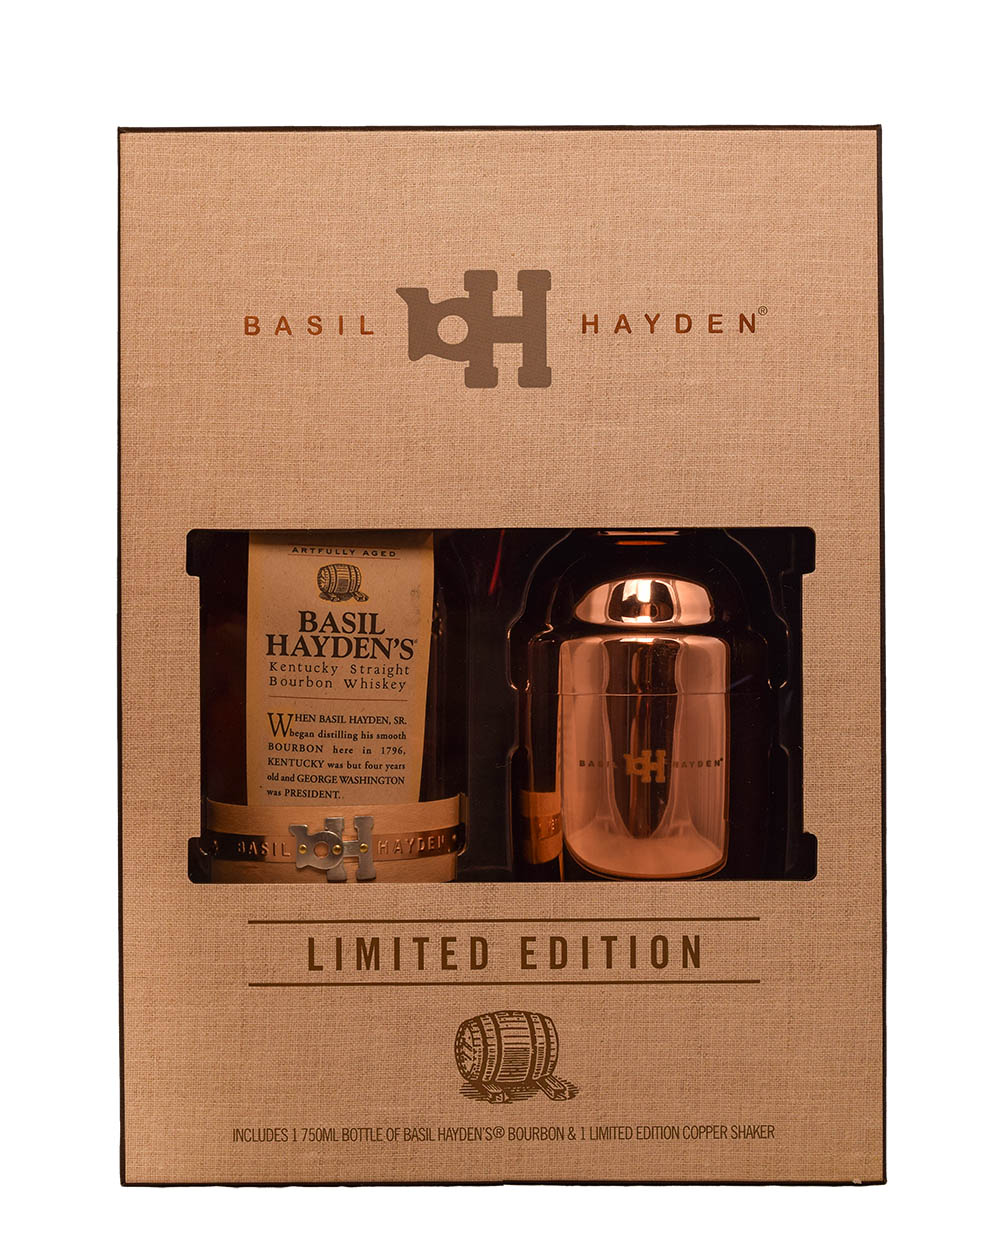 Basil Hayden's Kentucky Straight Limited Edition Copper Cocktail Set Box 2 Musthave Malts MHM